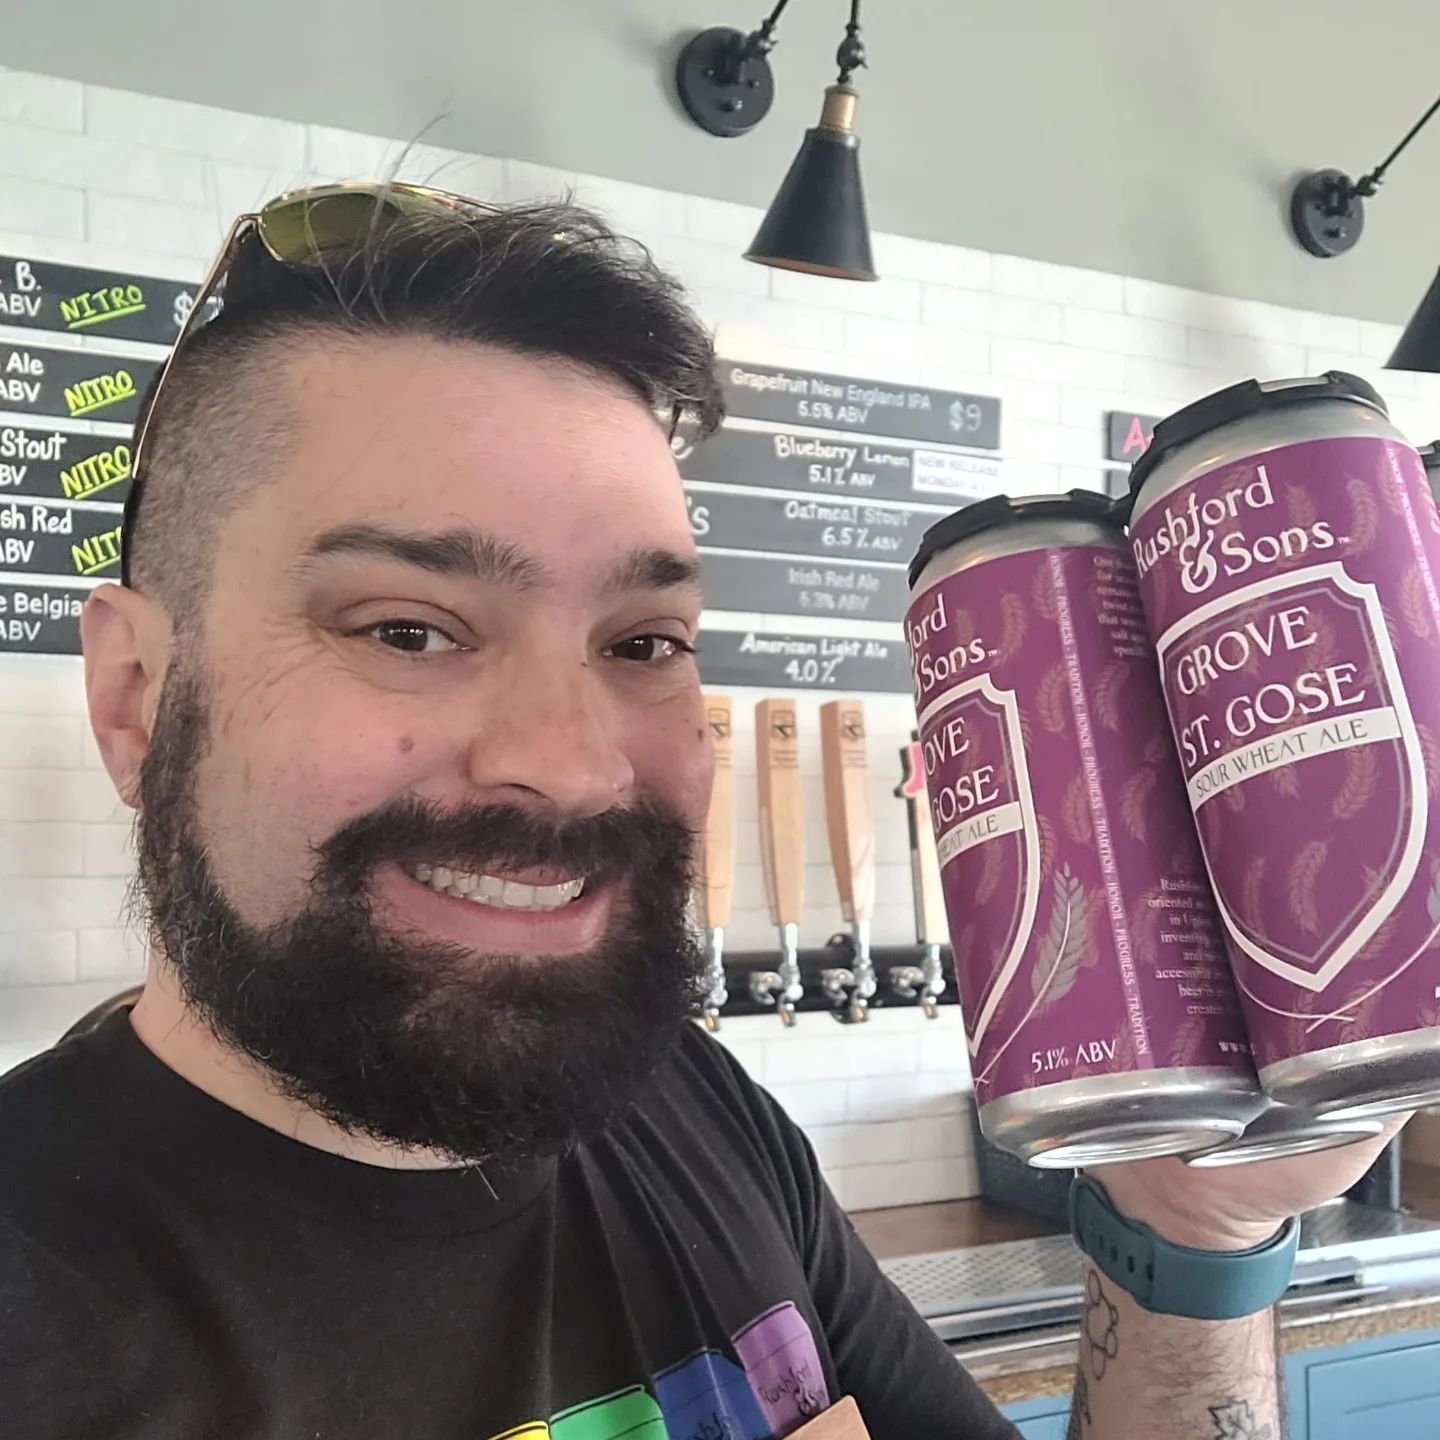 Yours truly slingin' the suds on this beaaaauuuuuuutiful patriots day/marathon Monday!  We have our new blueberry lemon gose available on tap and in cans now!  No food truck though but I also have 3 bougie boxes left and they're the perfect beer snac